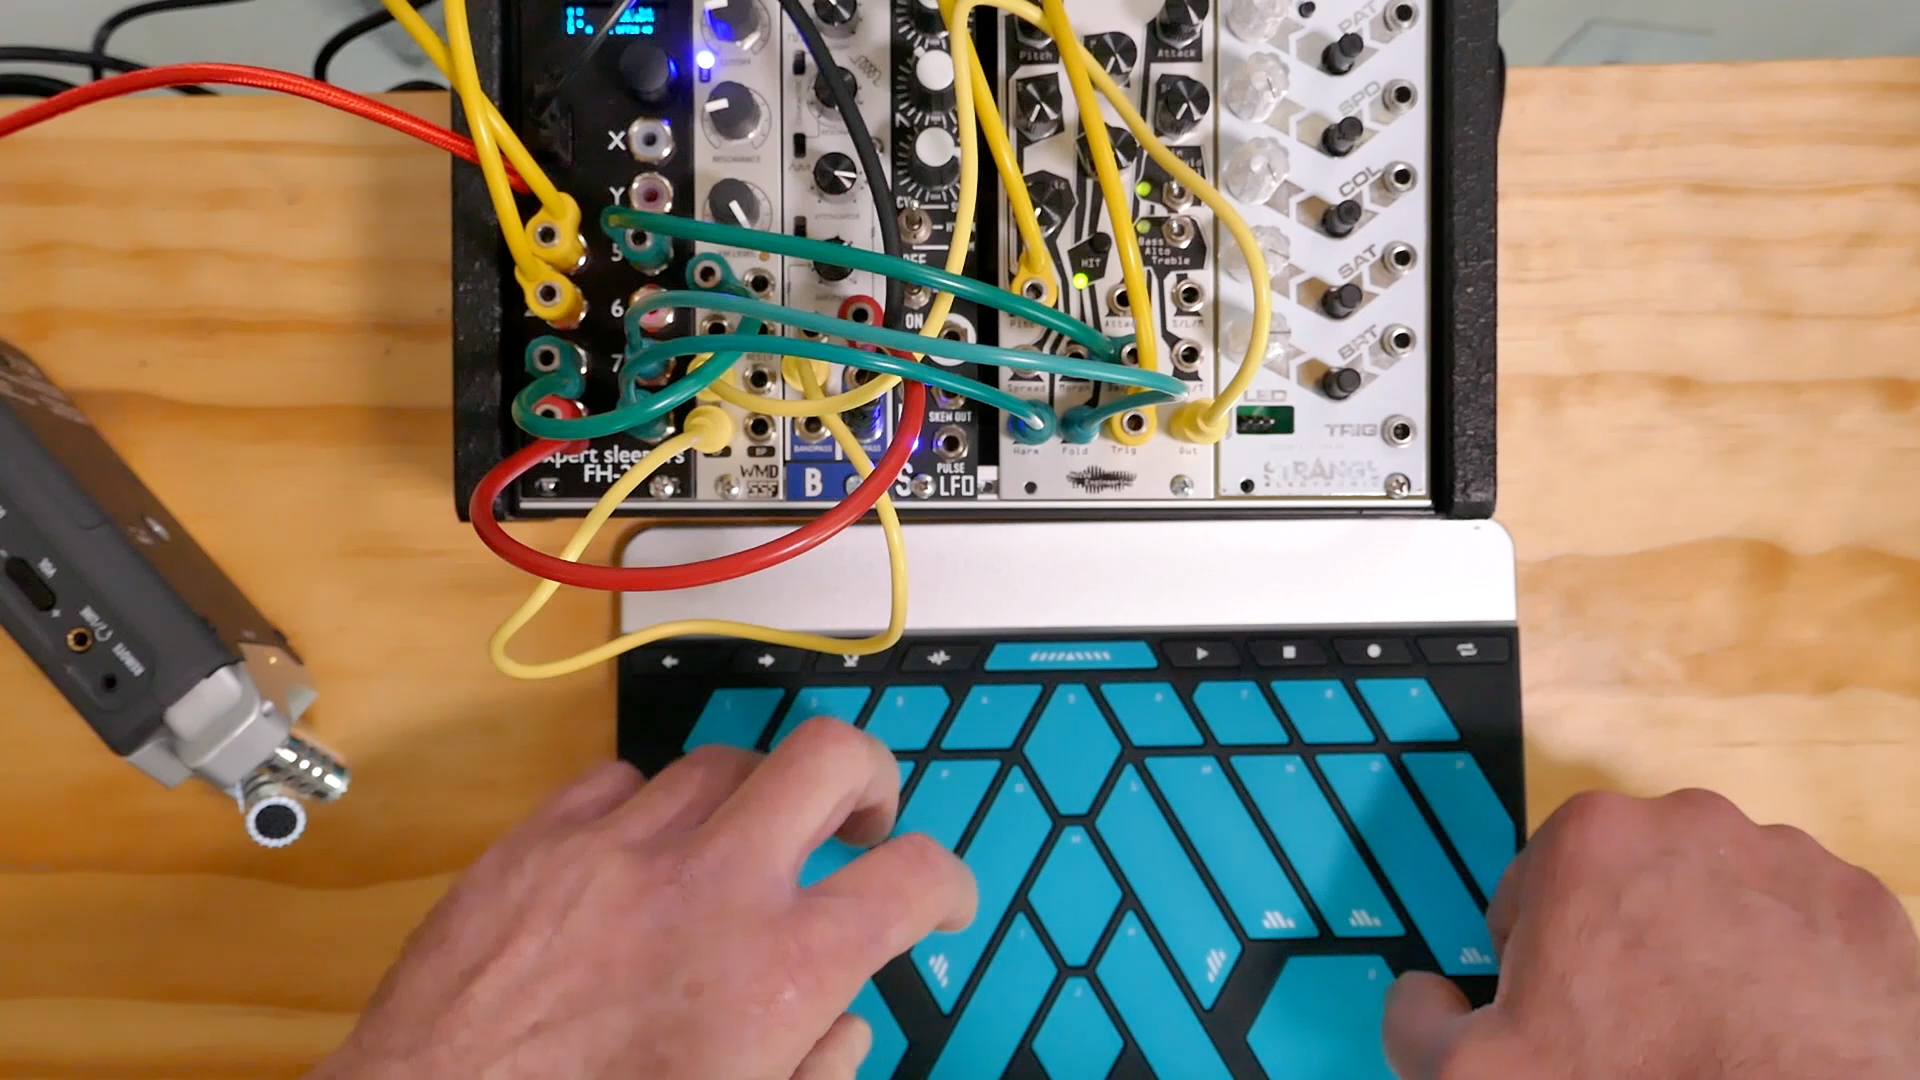 Working with Modular Synths and the Morph